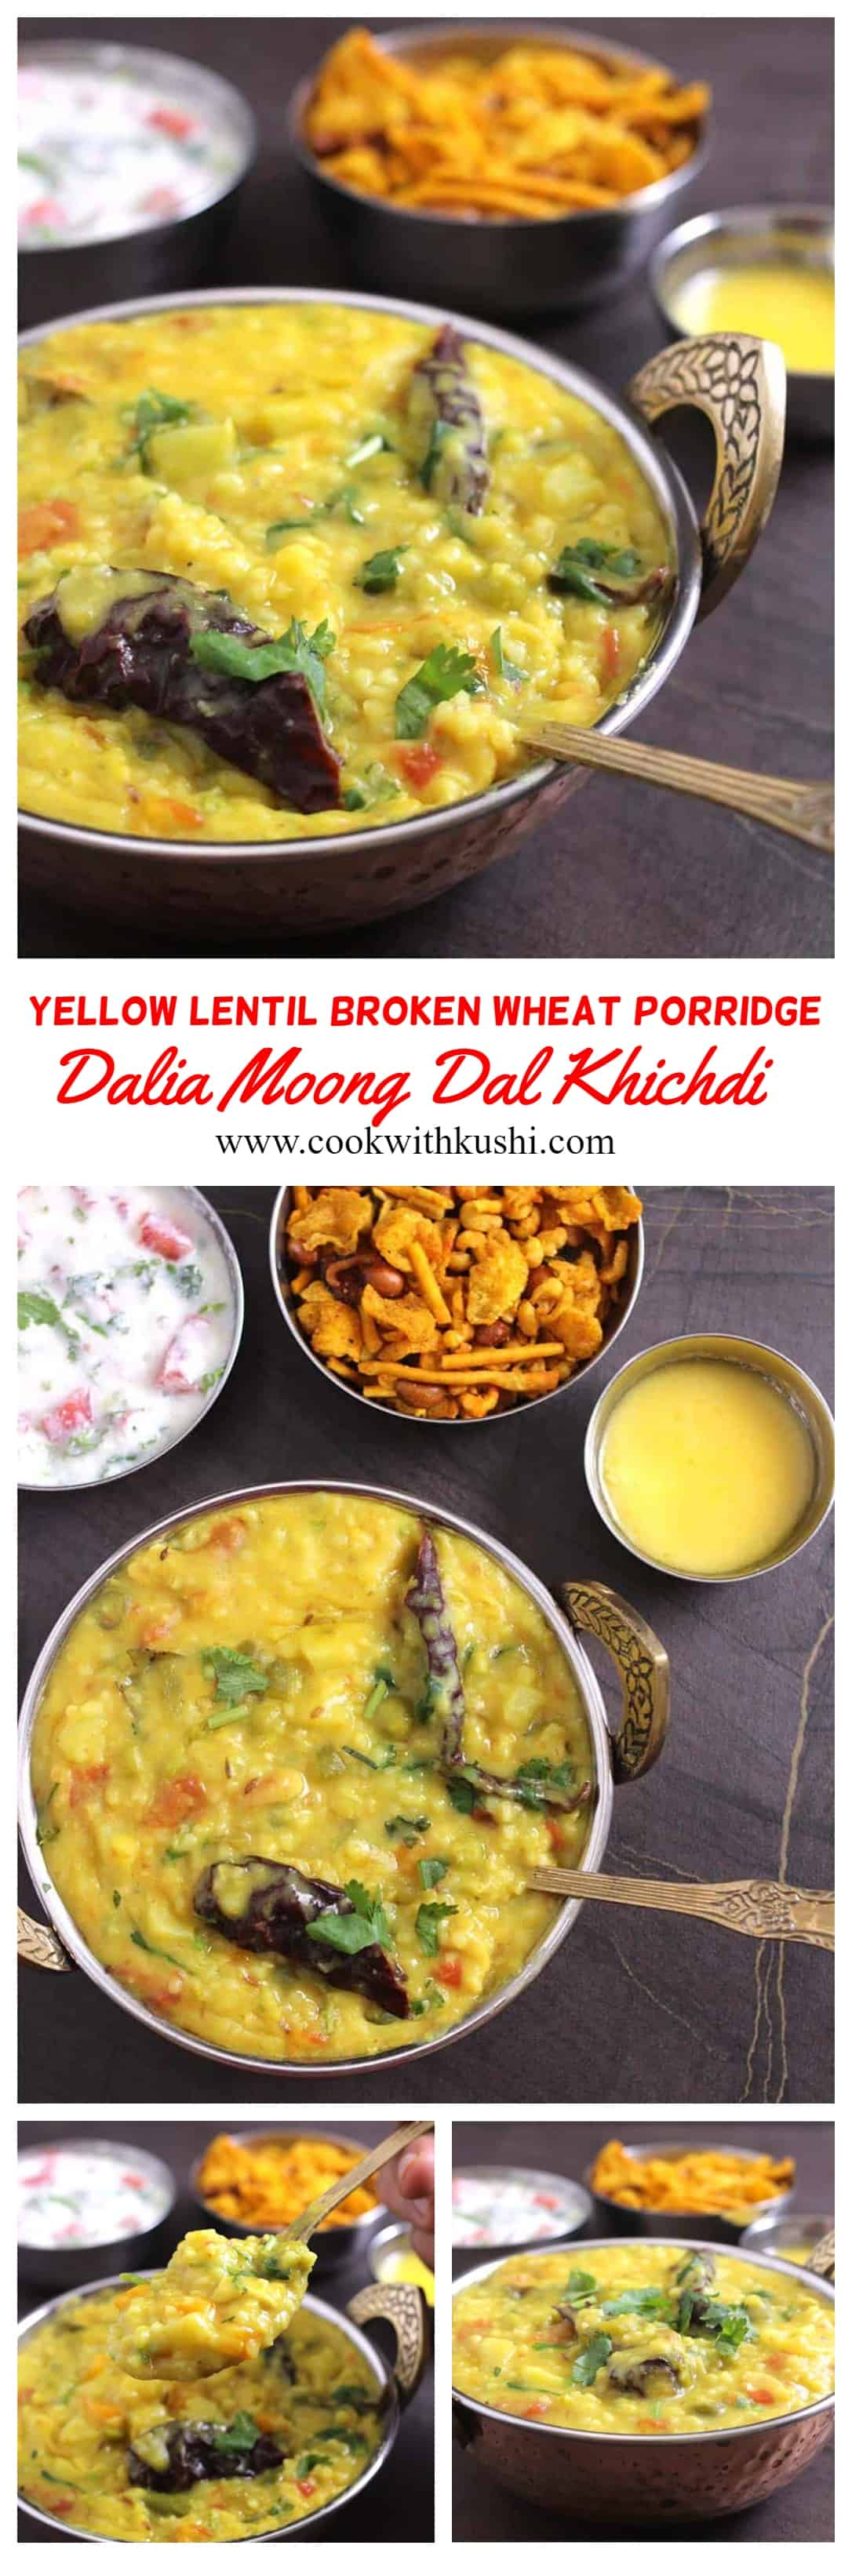 Dalia Moong Dal Khichdi is a healthy, wholesome & nutritious, flavorful recipe prepared using broken wheat (bulgar), yellow lentil, and vegetables of your choice. #khichdi #porridge #onepot #vegetarian